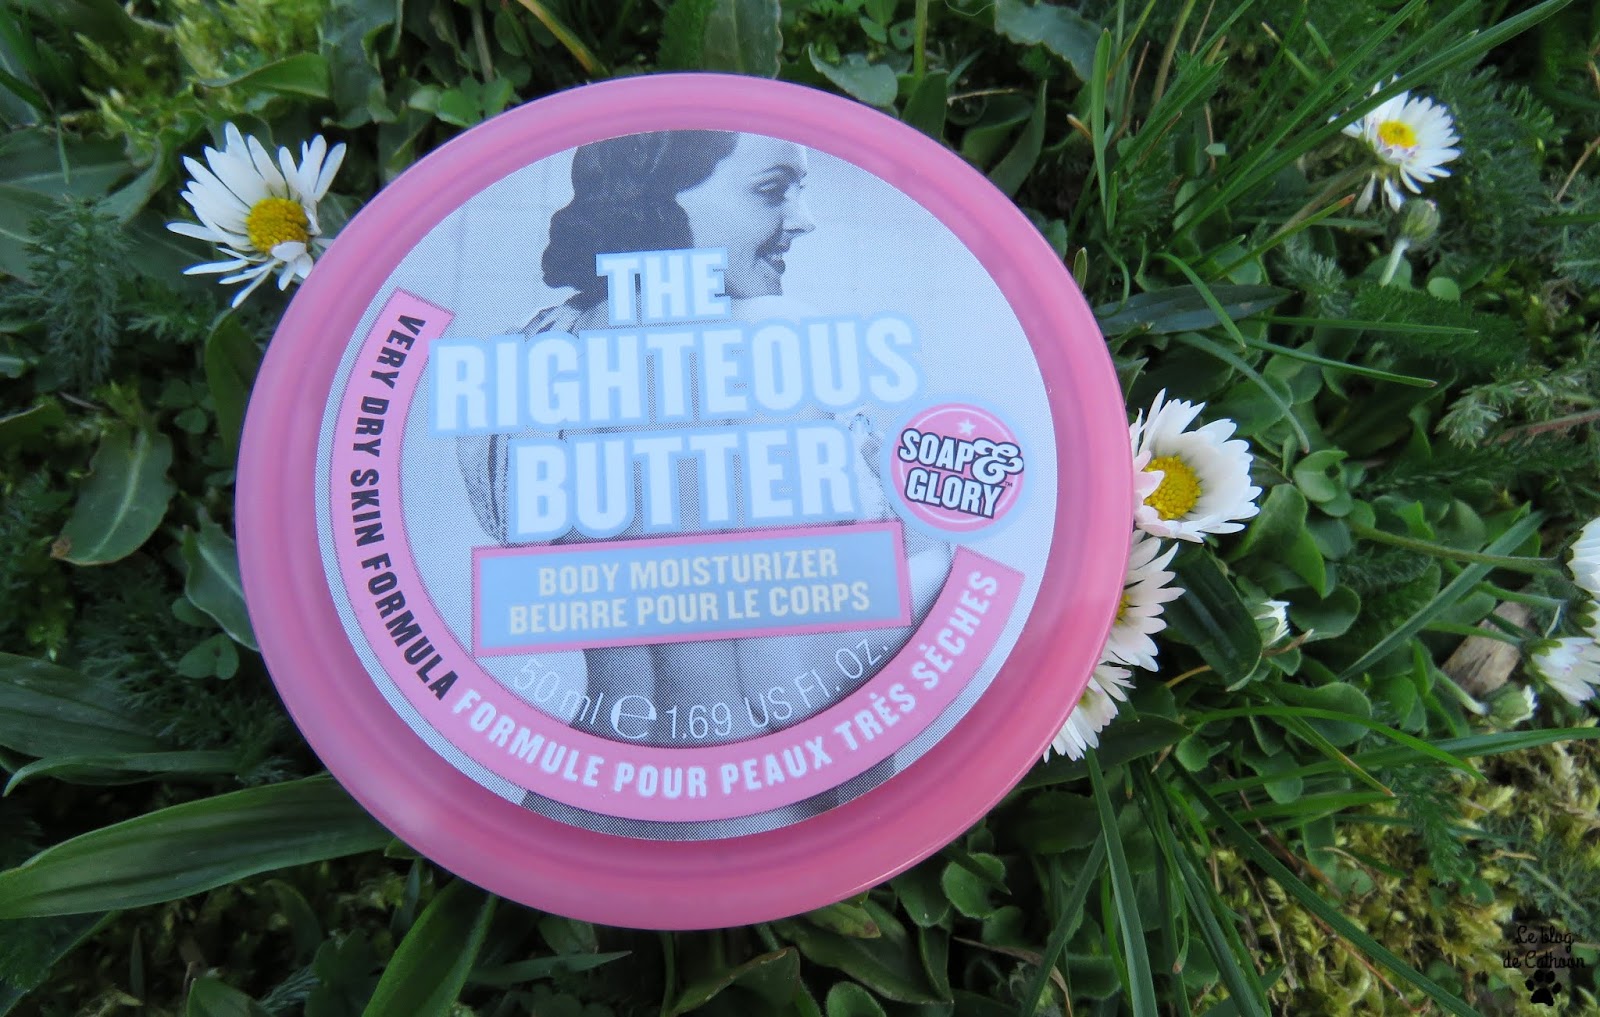 The Righteous Butter - Beurre pour le Corps - Soap & Glory